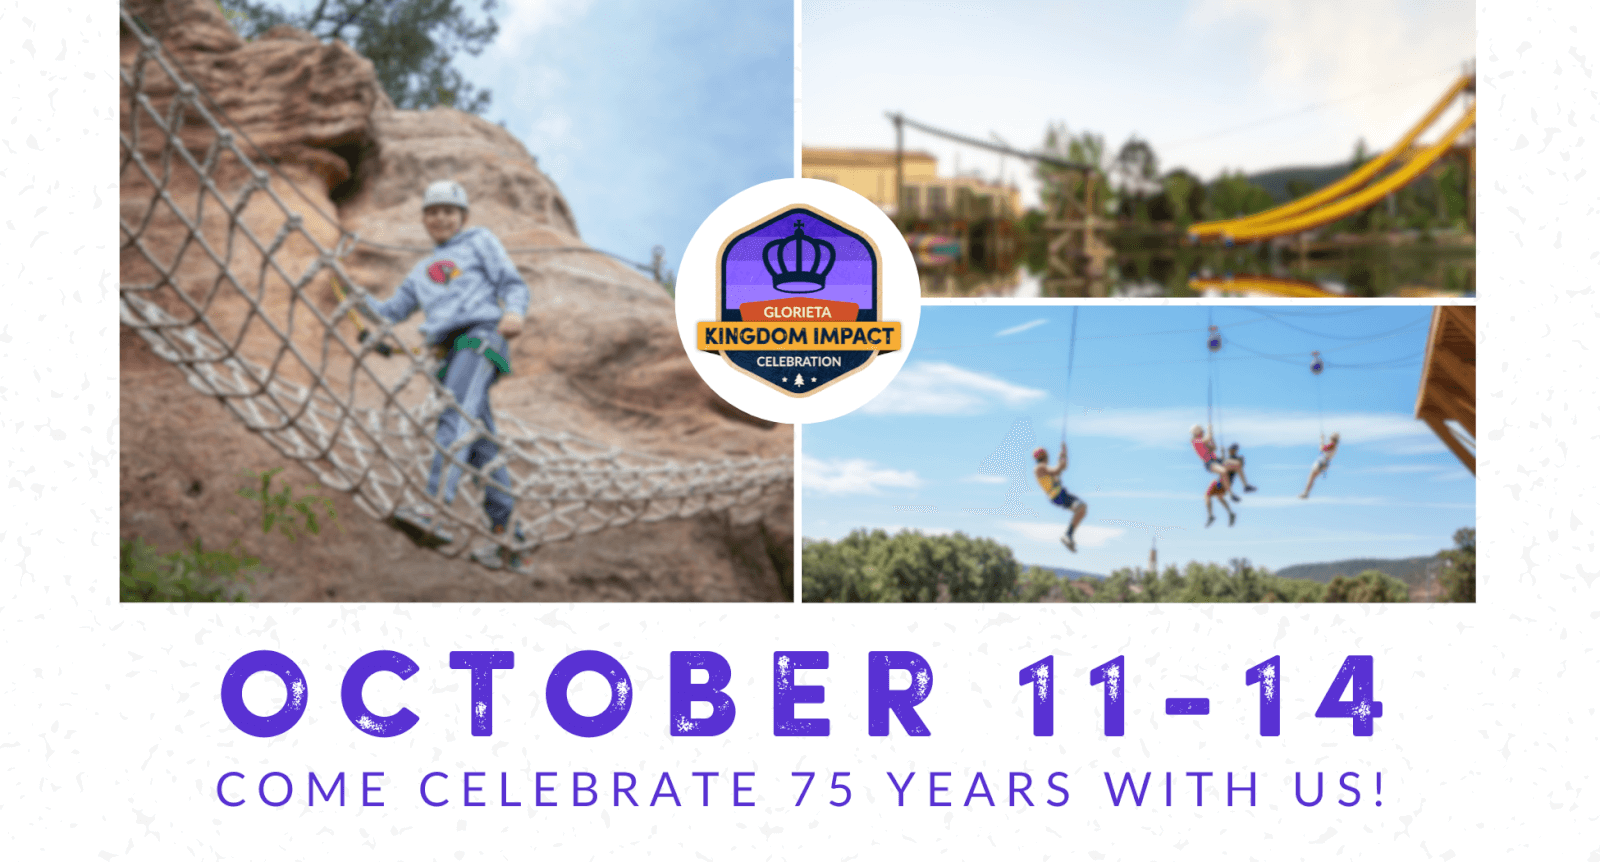 join us as we celebrate 75 years of ministry, October 11-14